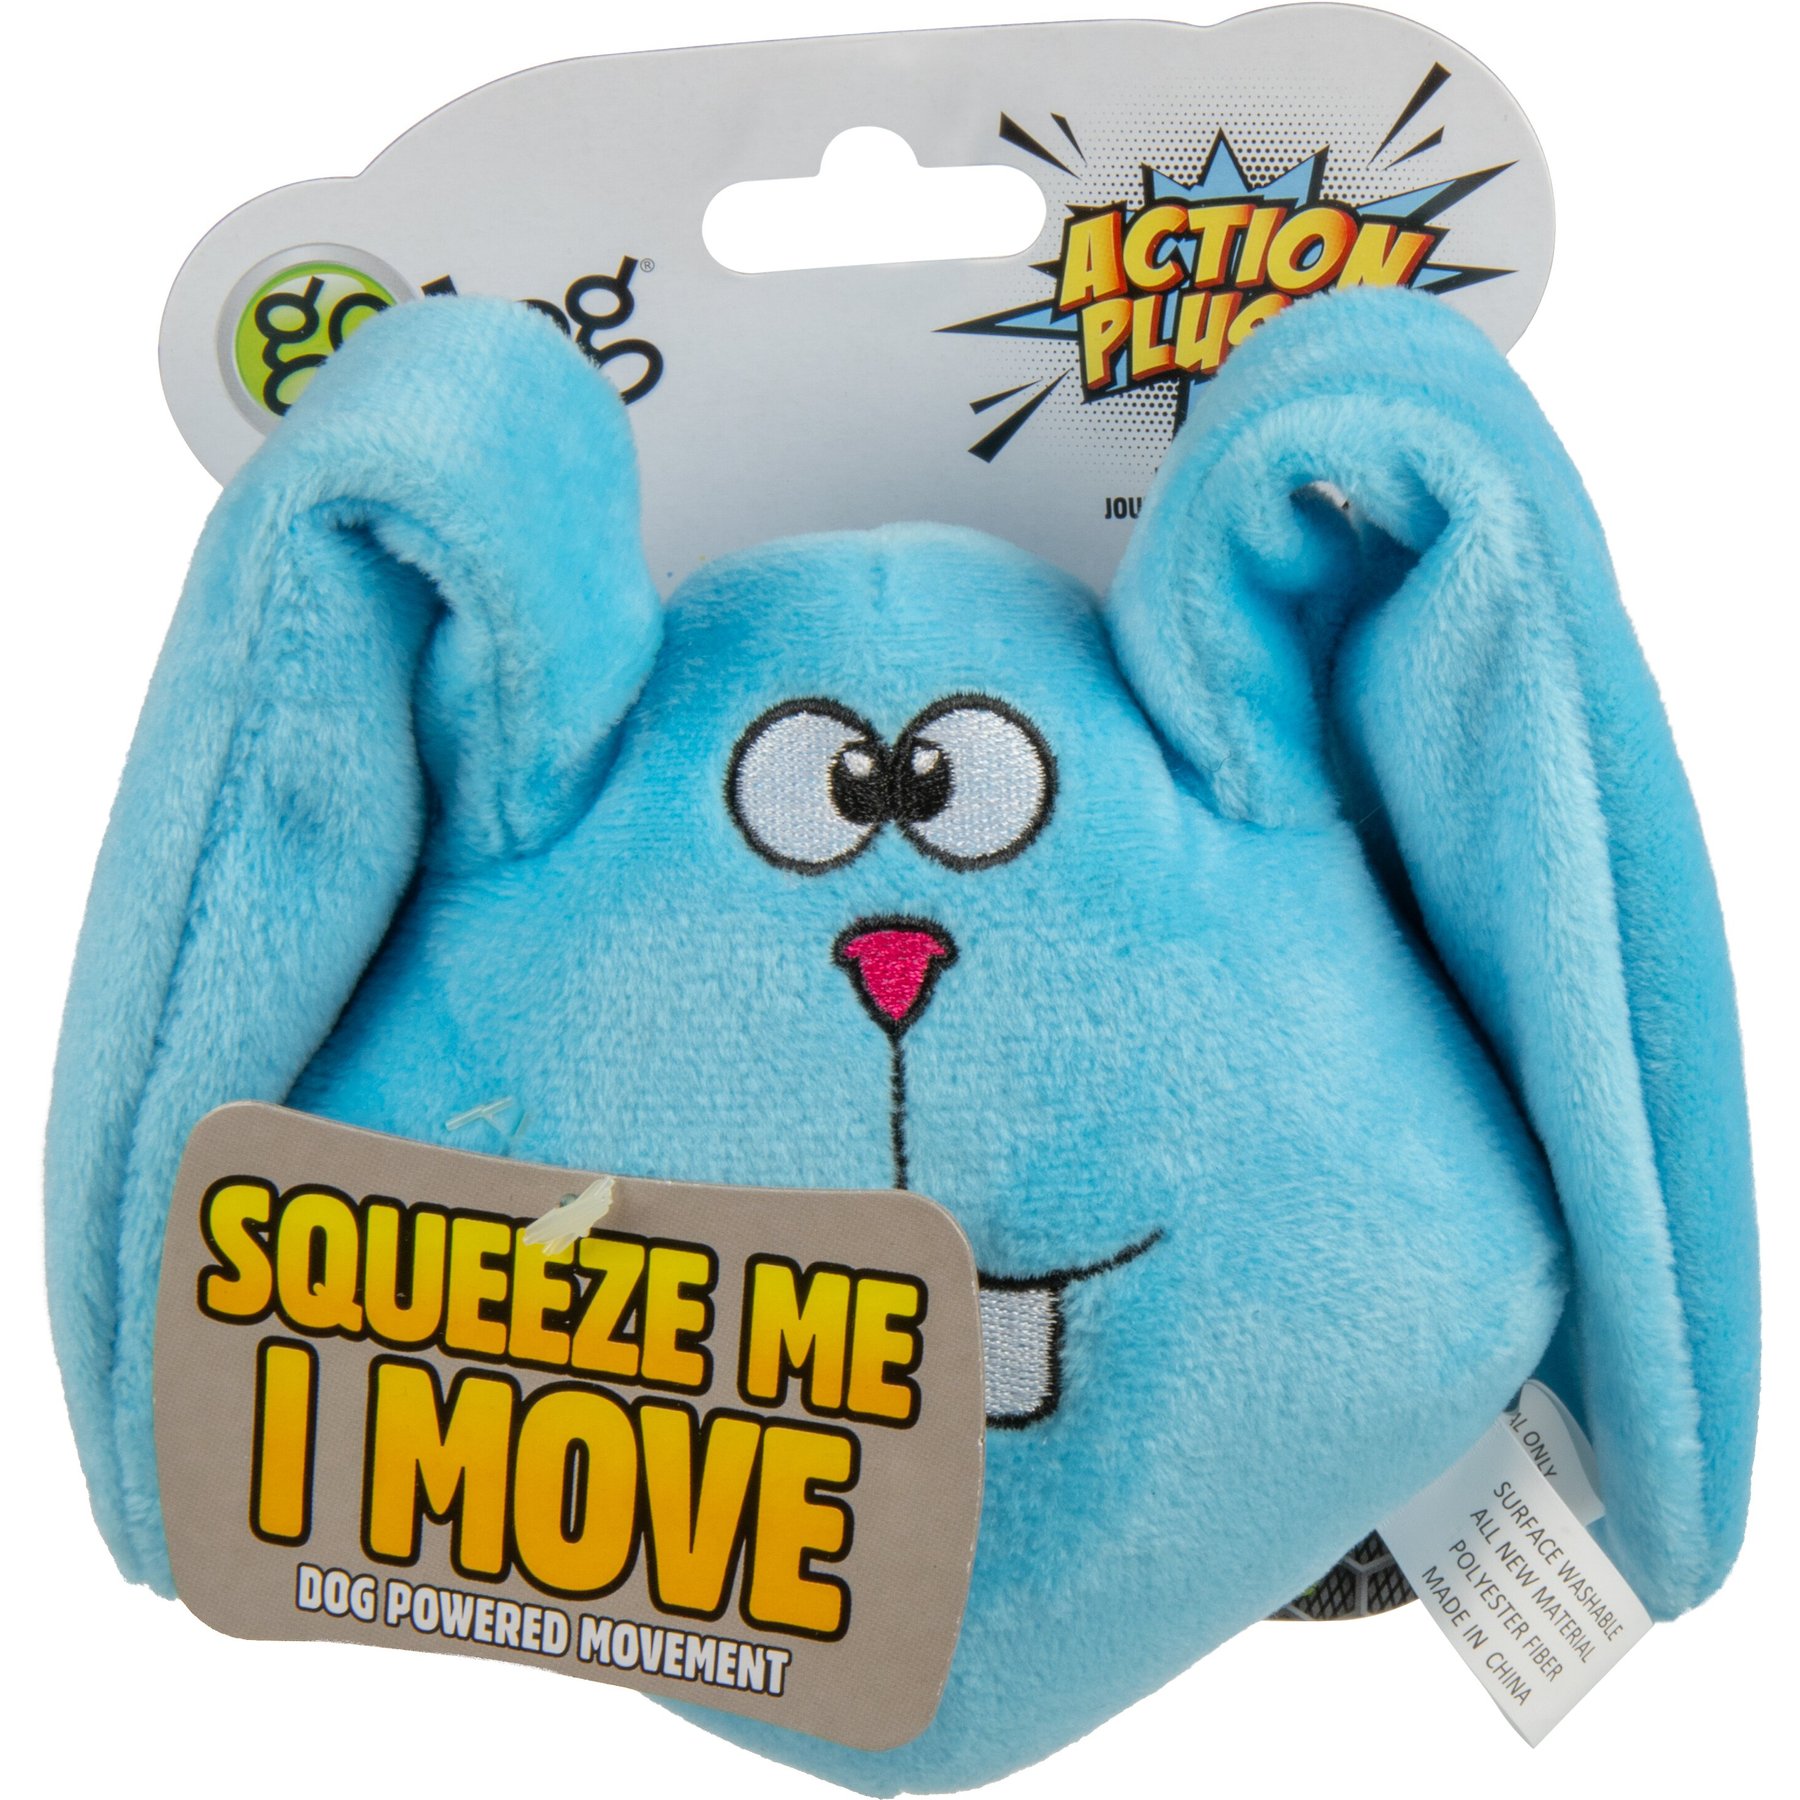 Squeeze Bottle Bunny Dog Toy - Love to Sew Studio